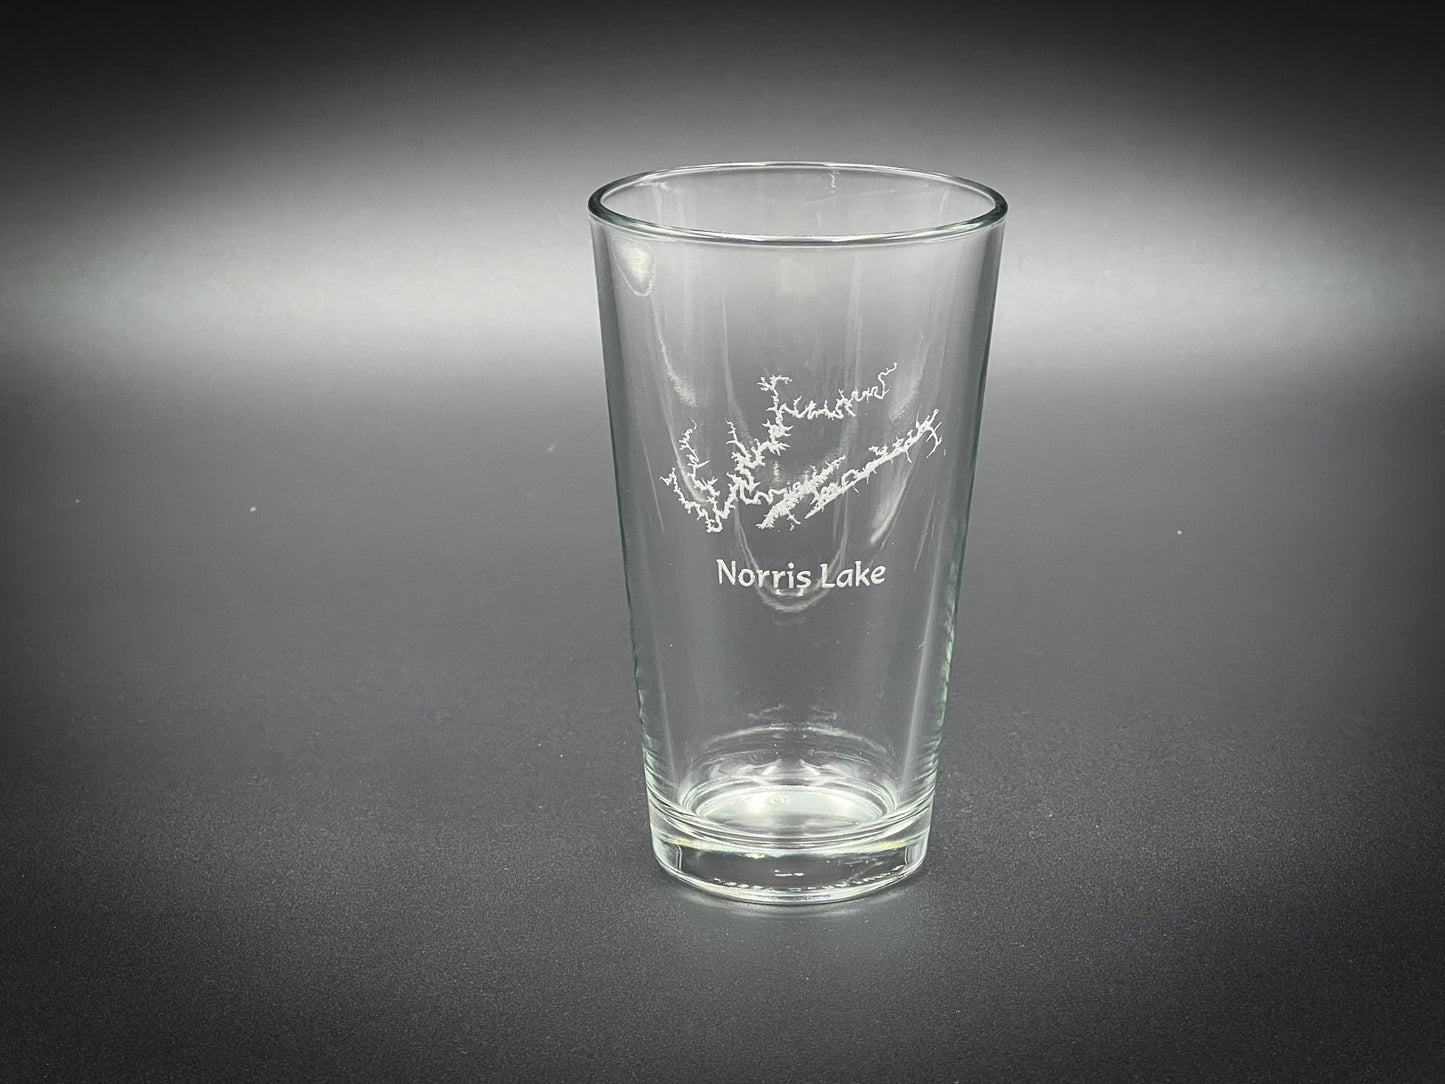 Norris Lake Tennessee Pint Glass - Lake Gift - Laser engraved pint glass